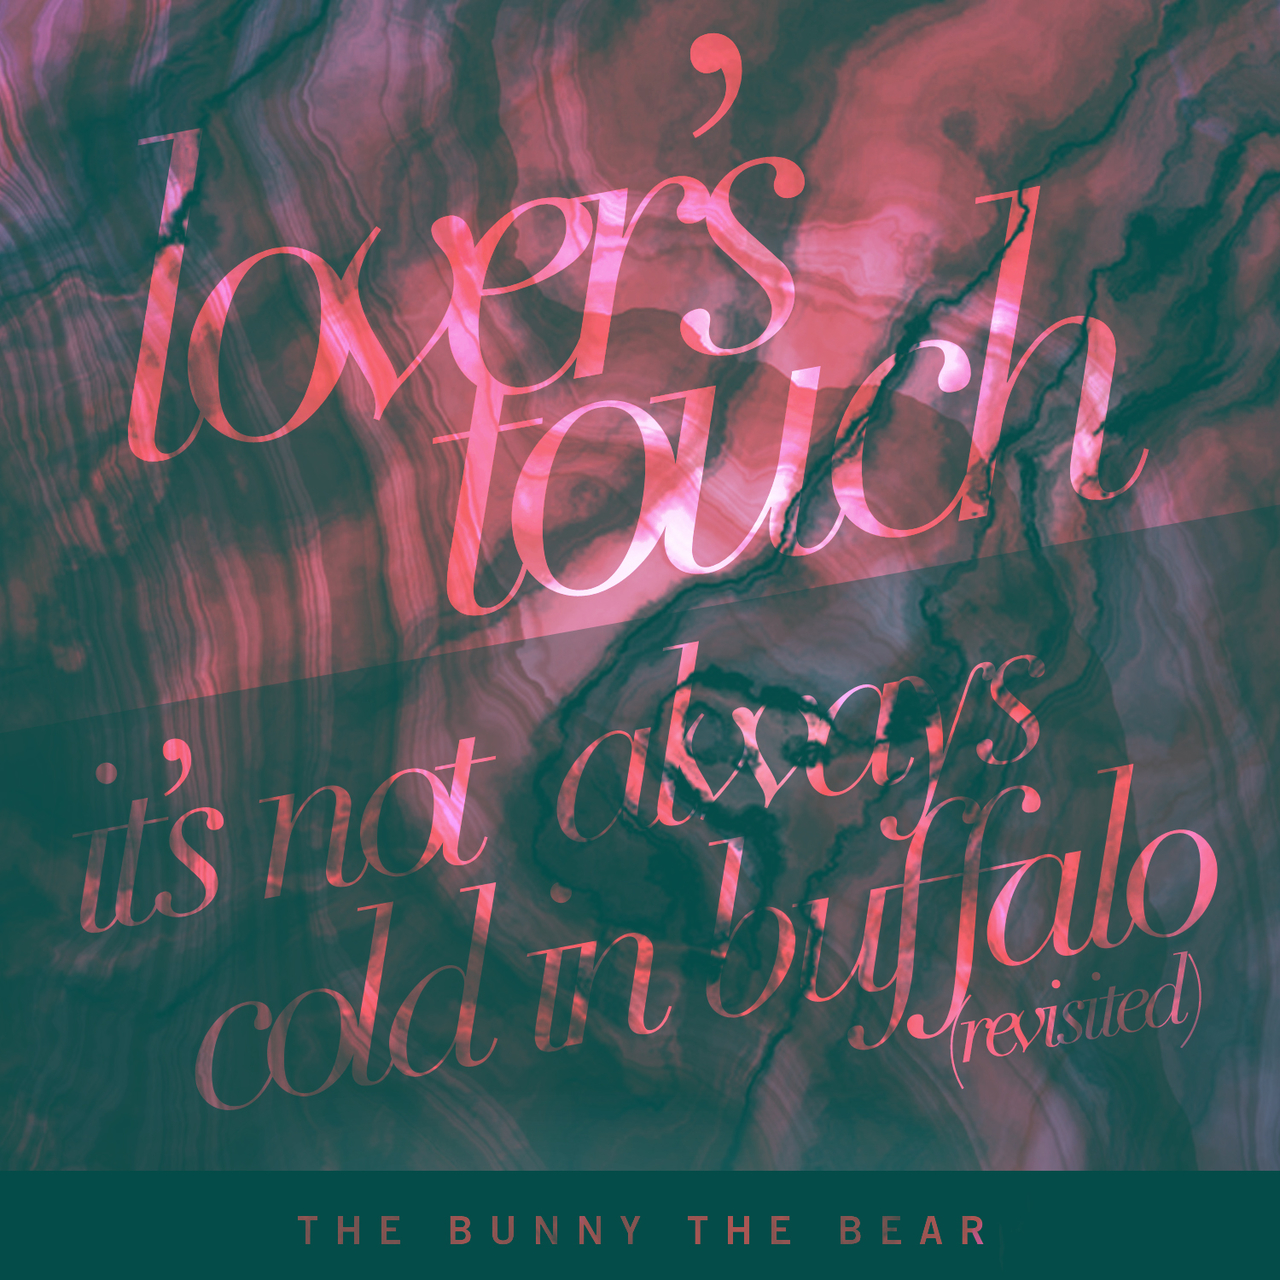 THE BUNNY THE BEAR - Lover's Touch / It's Not Always Cold in Buffalo (Revisited) cover 